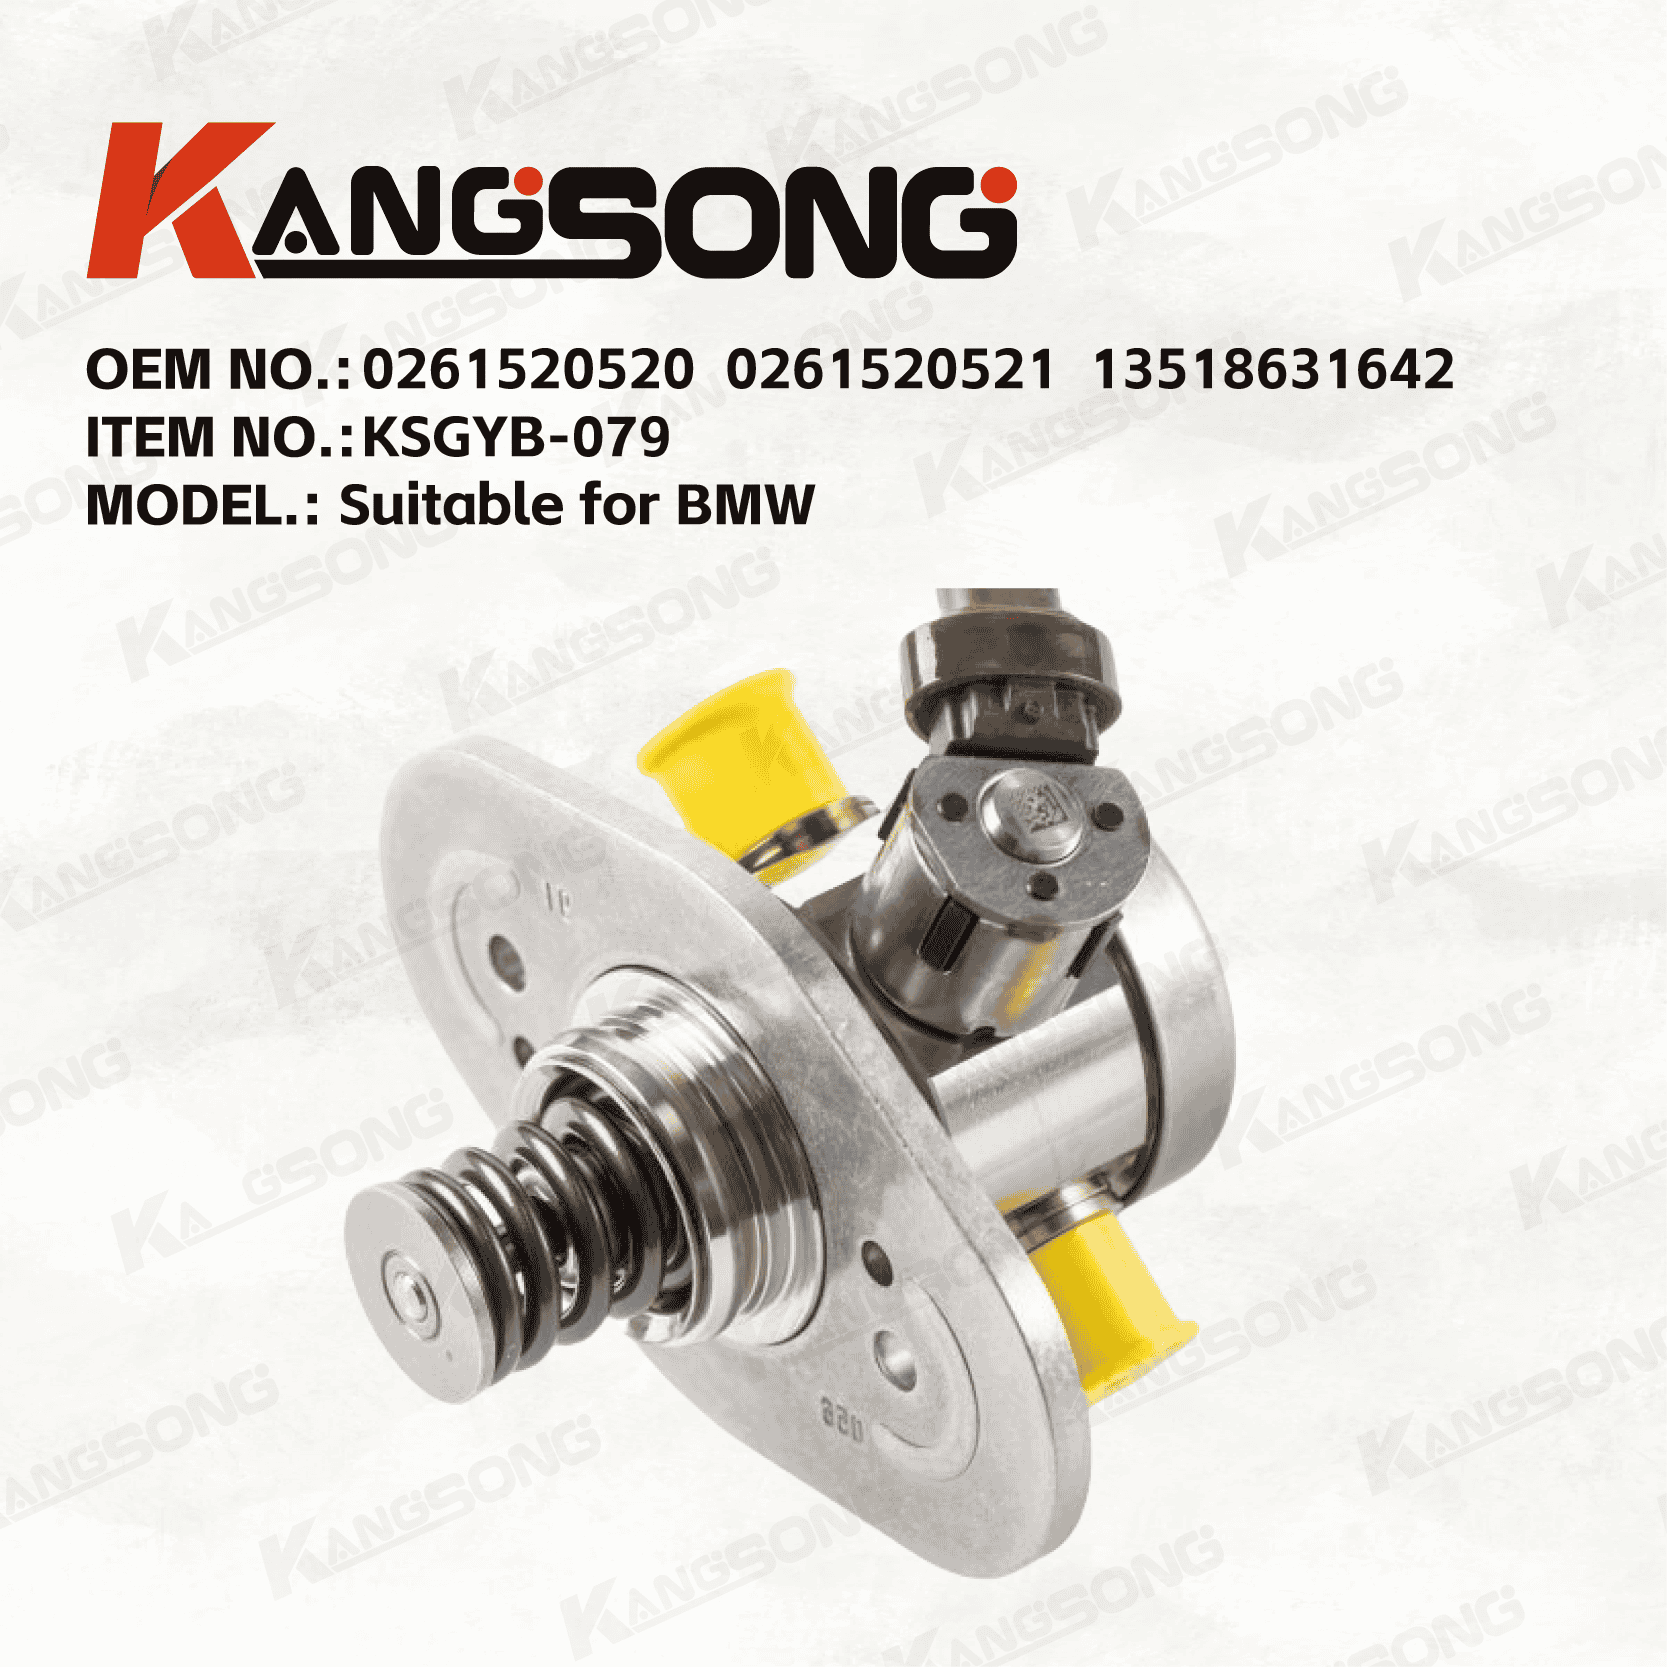 Applicable to BMW /0261520520 0261520521 13518631642/High pressure fuel pump/KSGYB-076